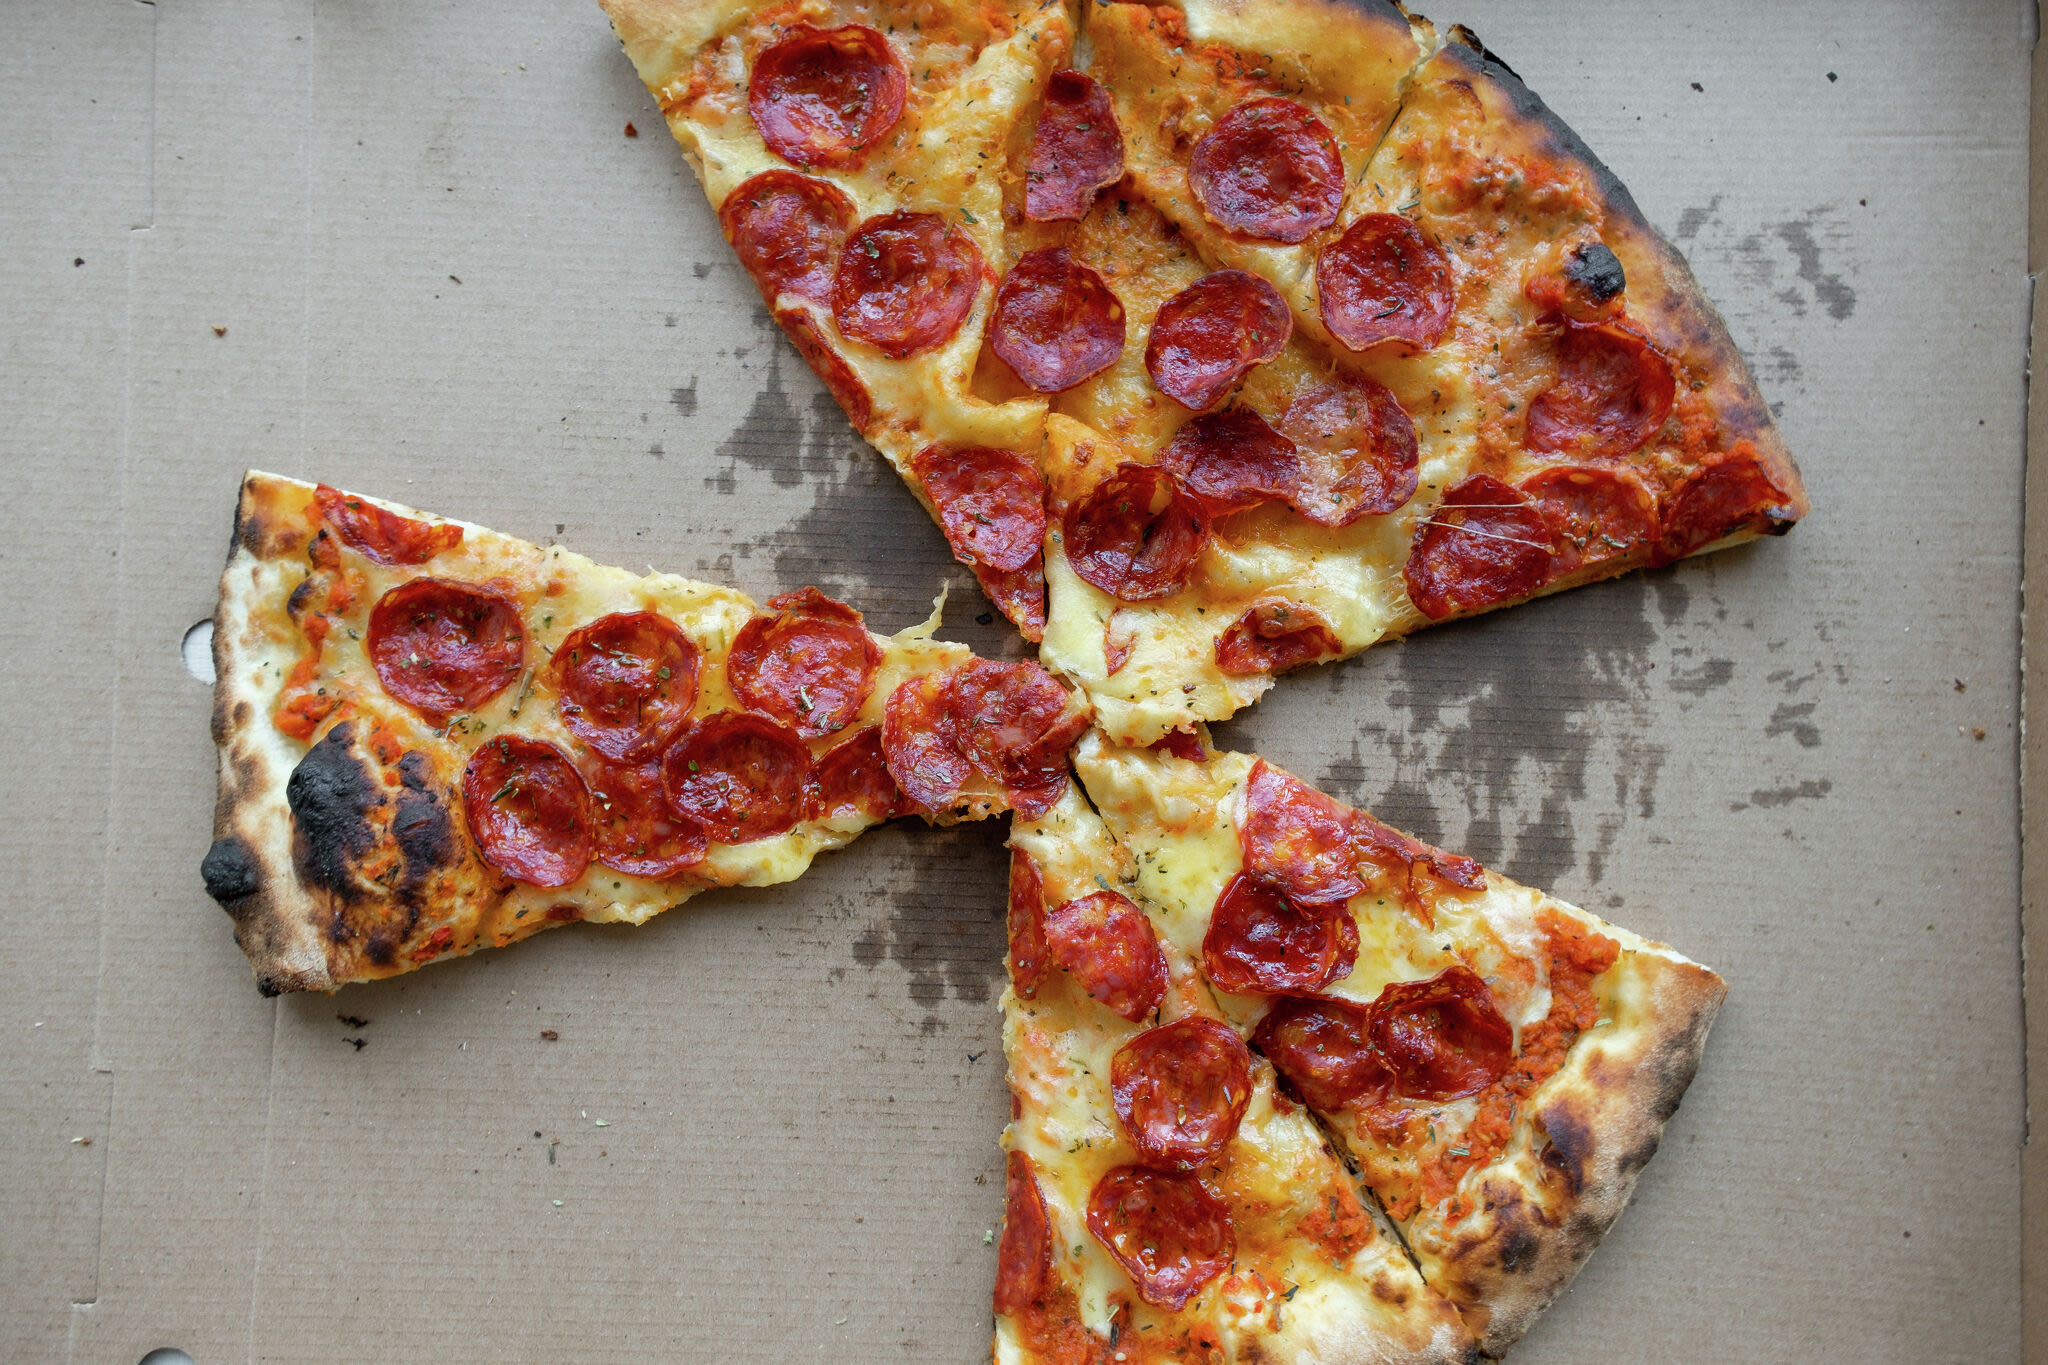 What is the best way to reheat leftover pizza?